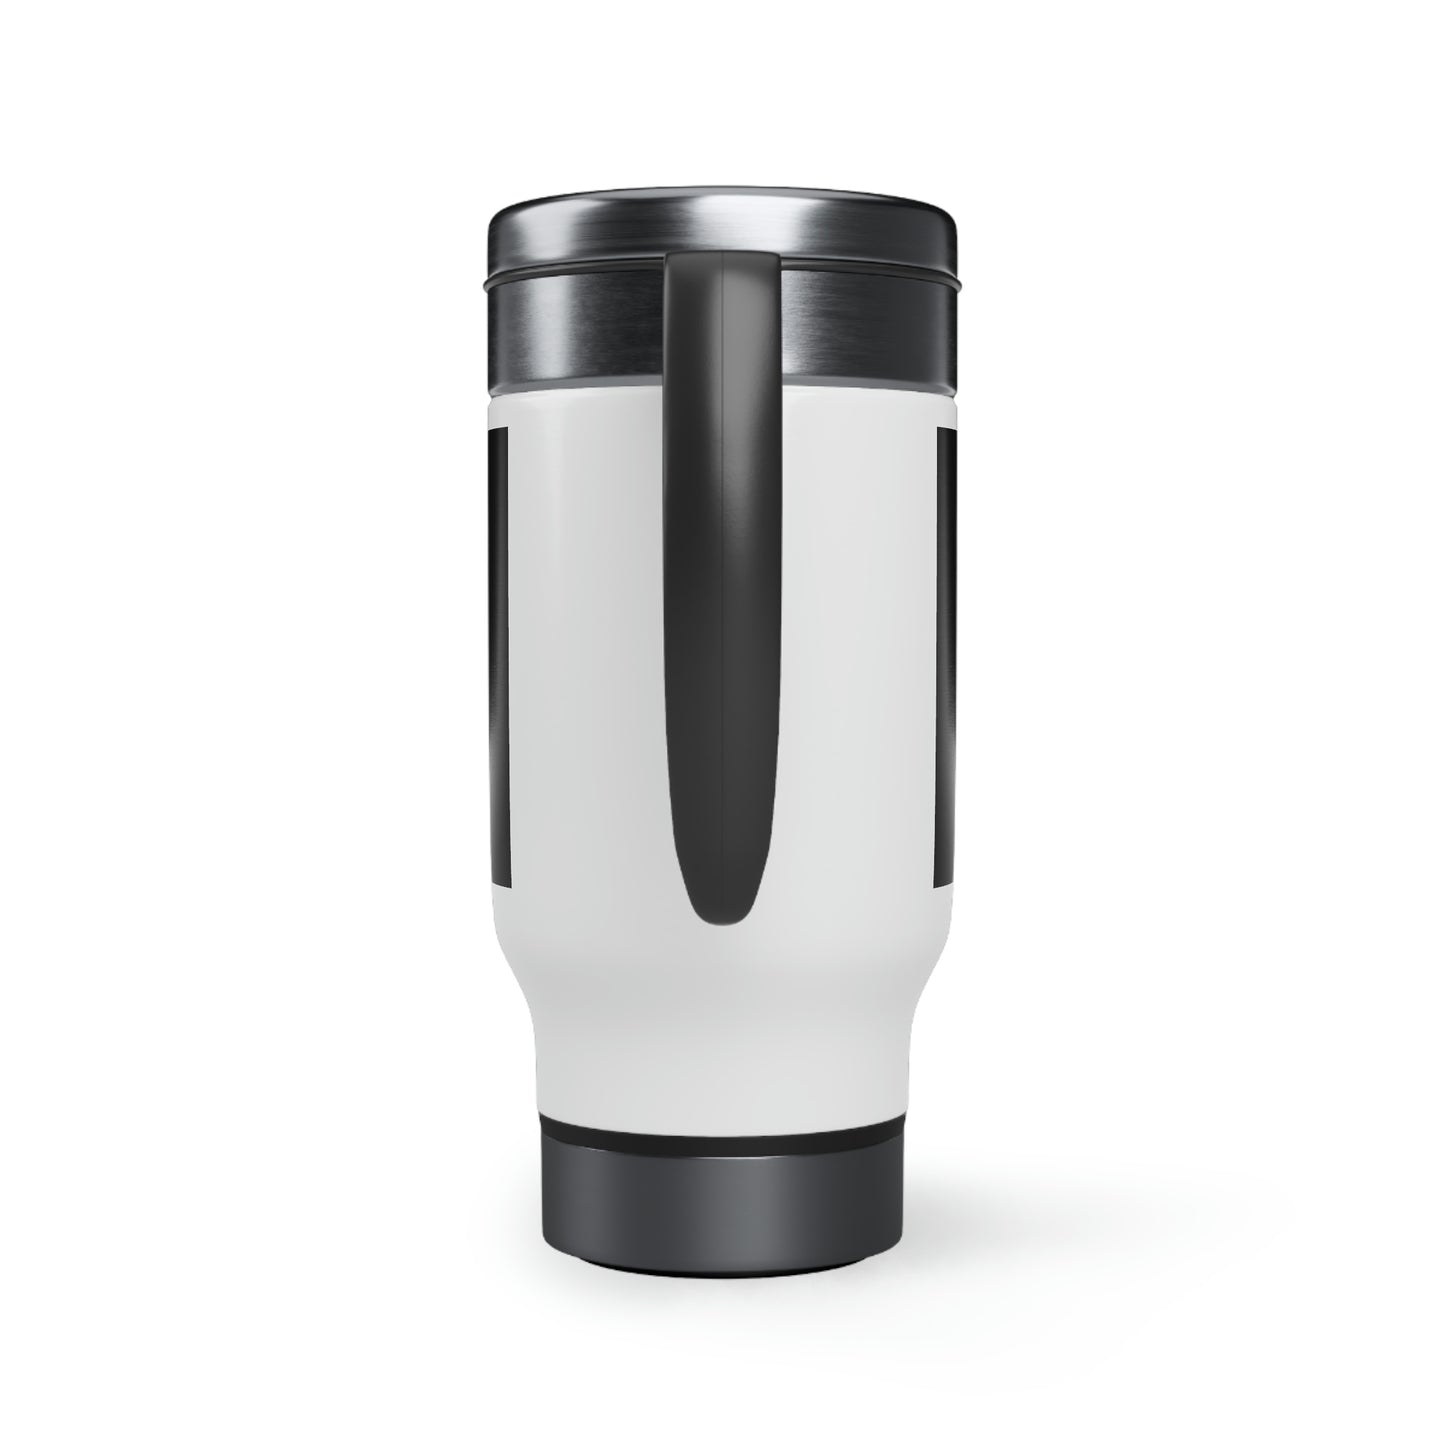 In Christ I Am Immeasurably Valued Travel Mug with Handle, 14oz